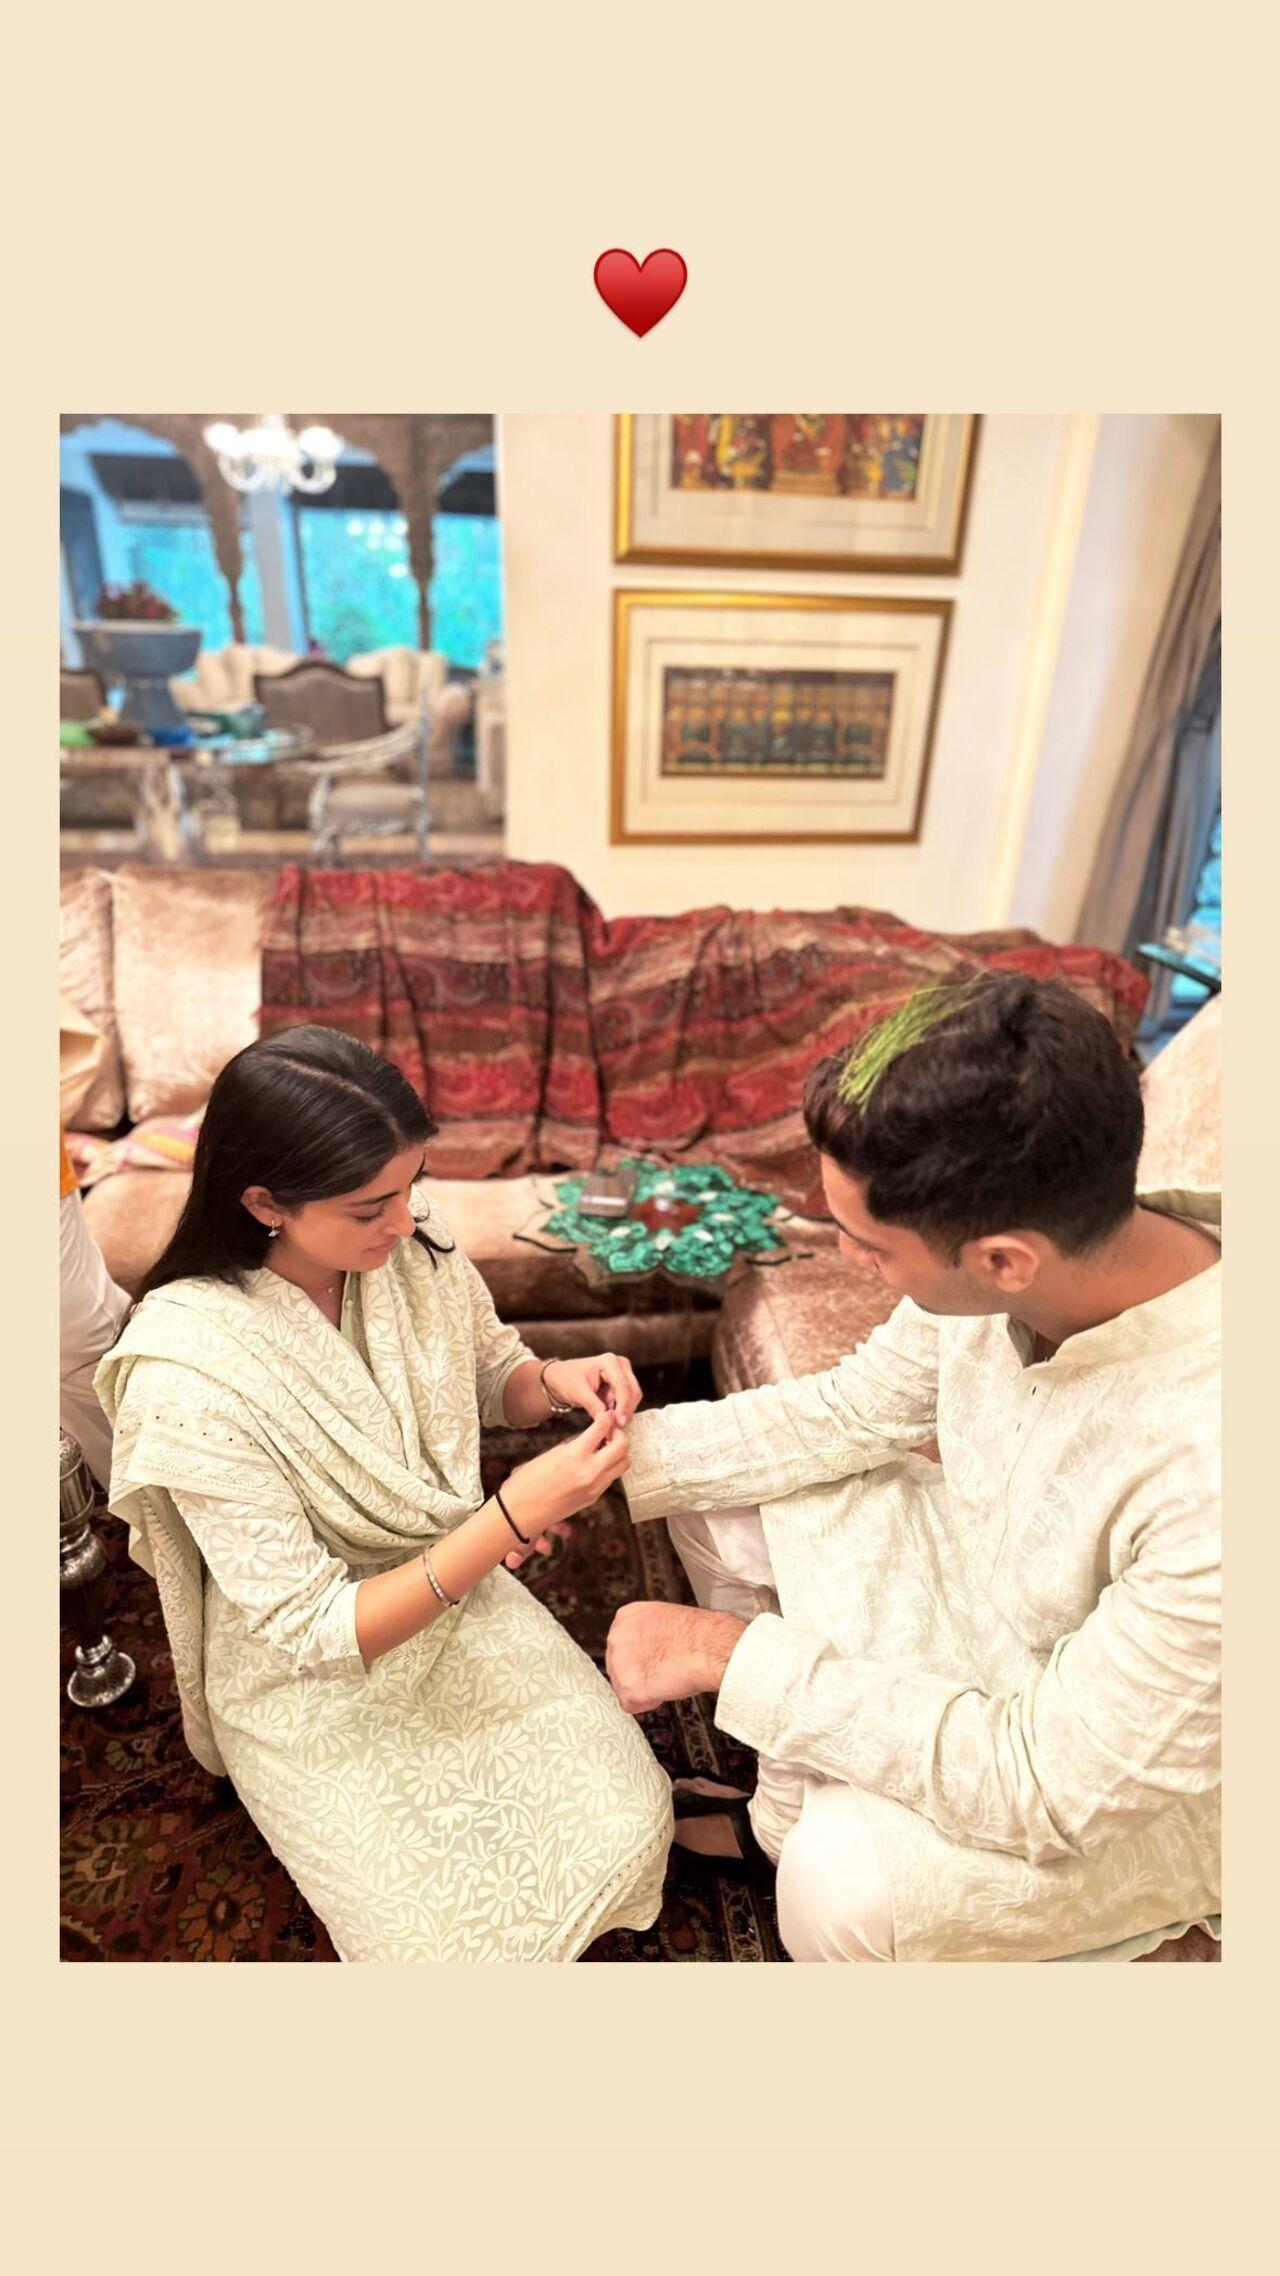 Navya shared a picture of her tying rakhi to her younger brother, Agastya. They are children of Amitabh Bachchan's daughter Shweta Bachchan and her husband Nikhil Nanda